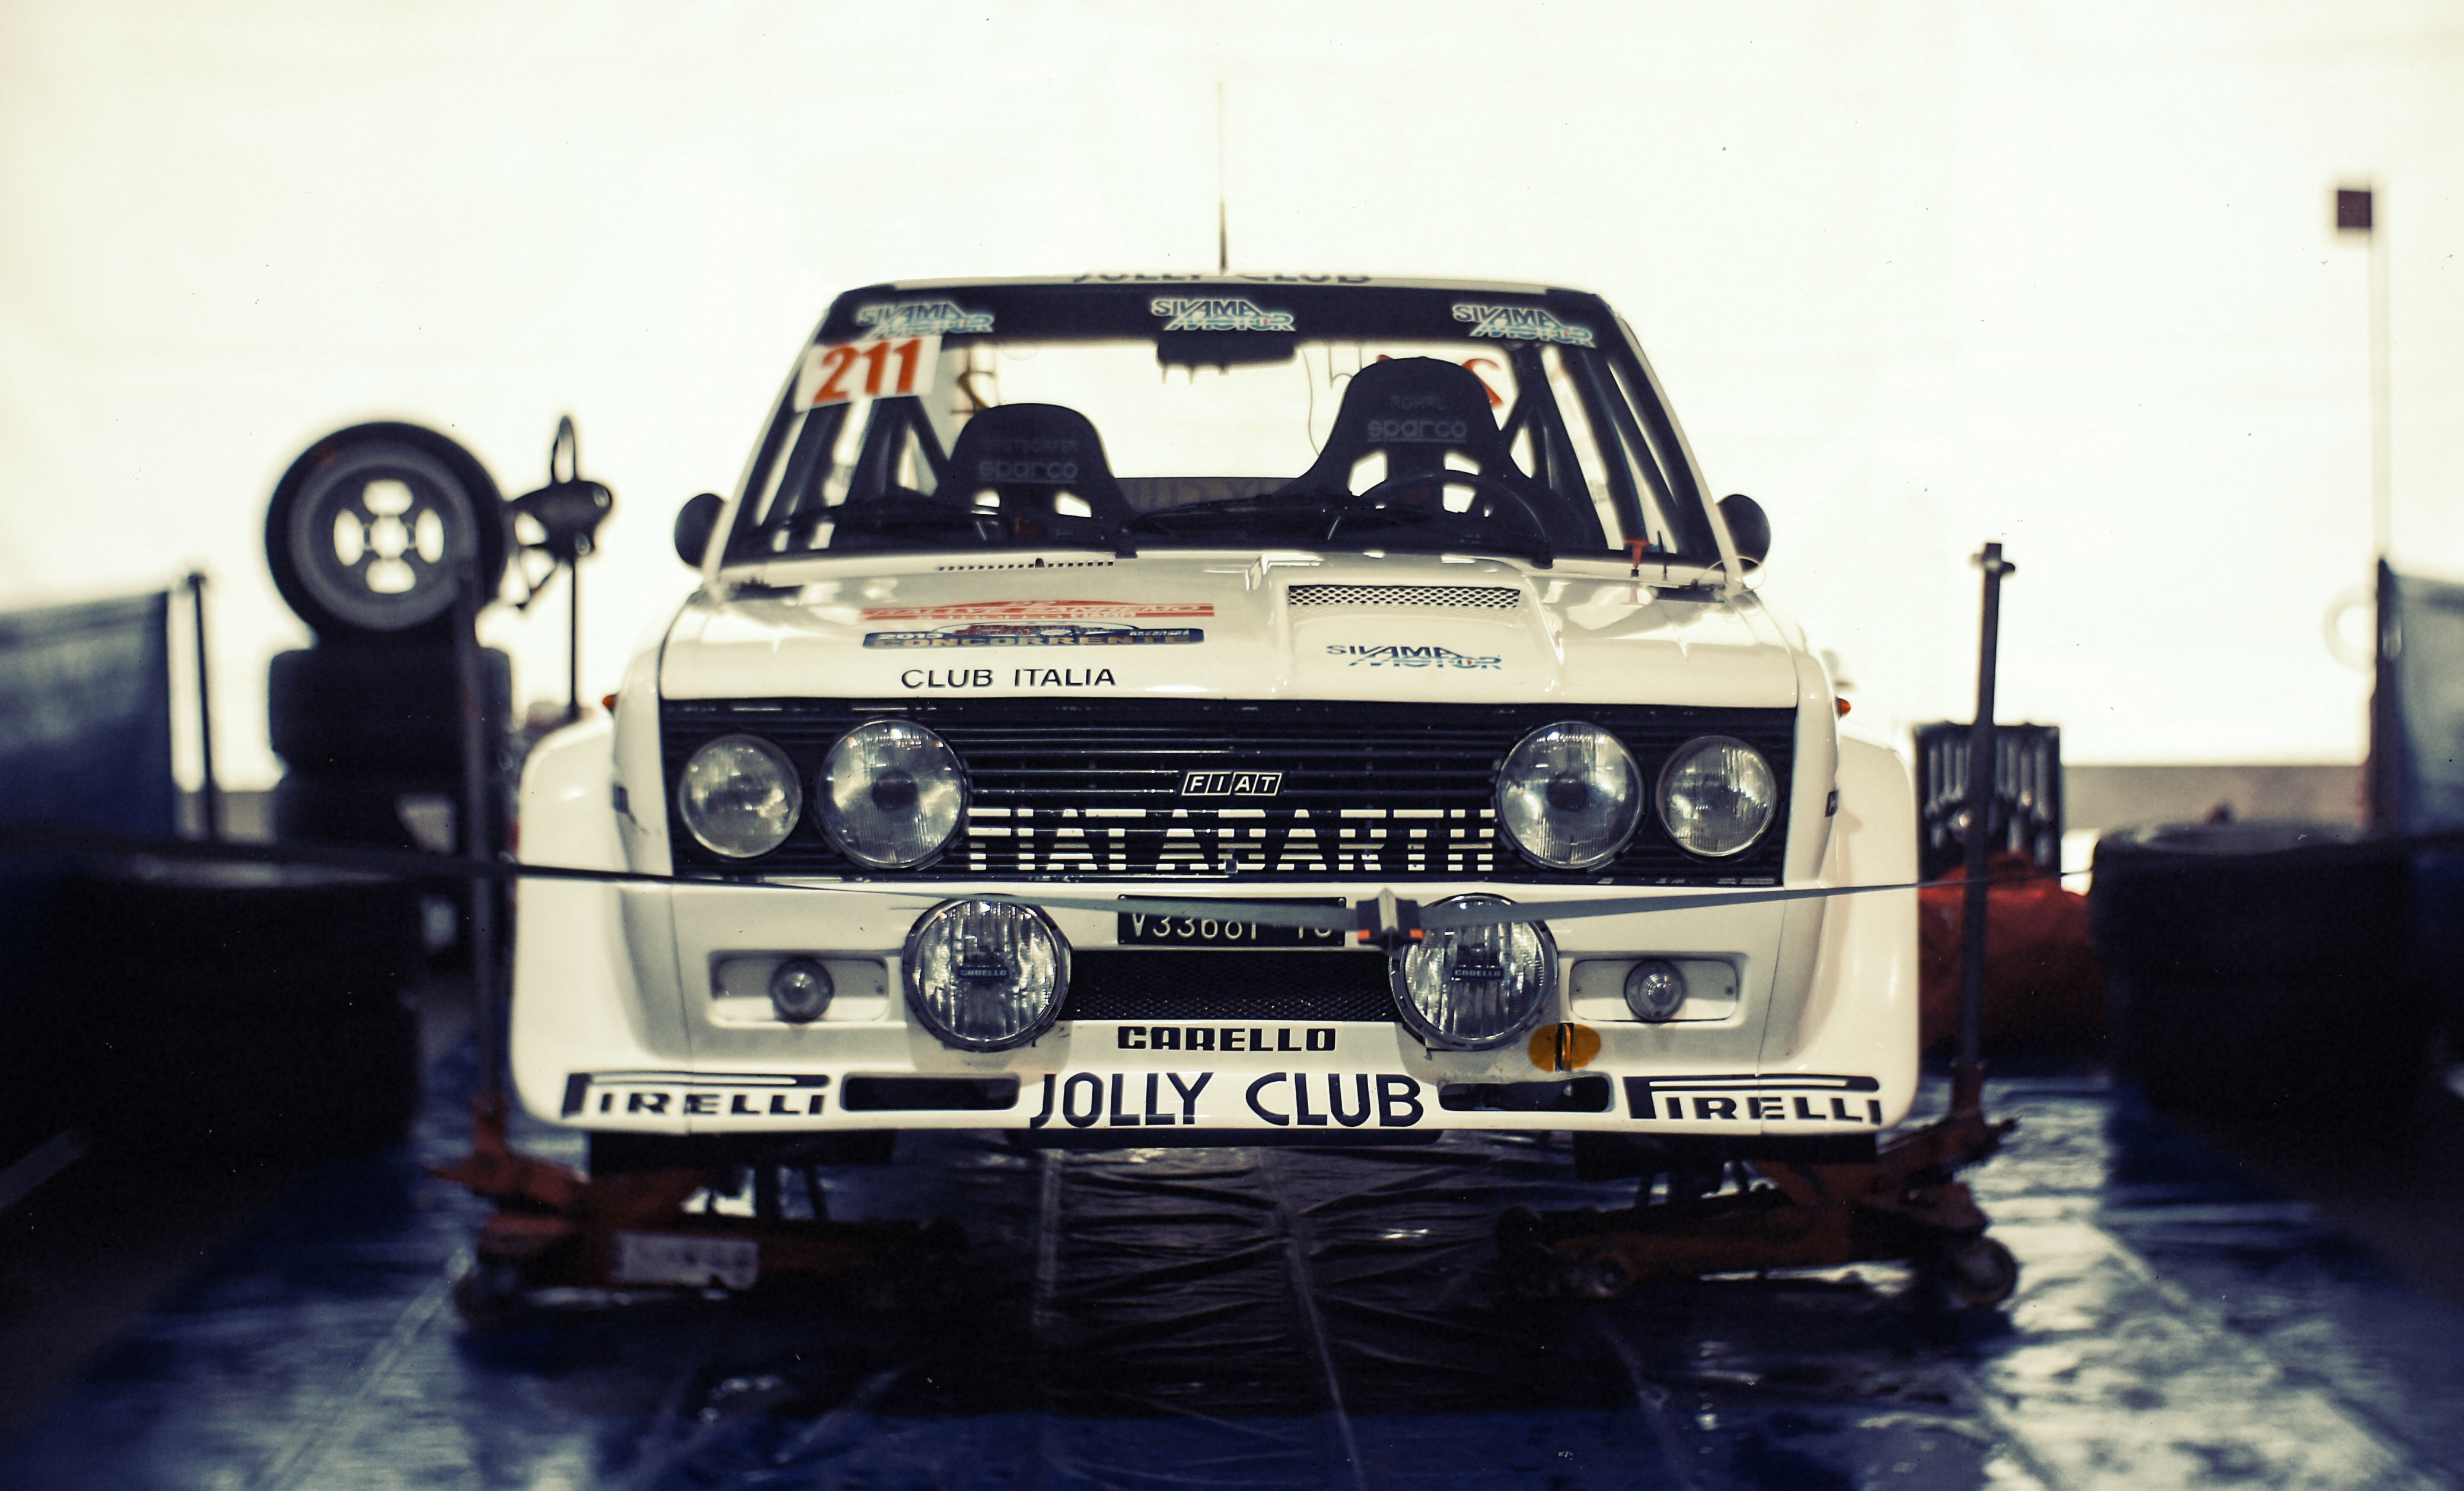 Wallpaper, technology, Abarth, porn, monza, motorsport, automotive design, automotive exterior, race car, model car, family car, rallying, sport utility vehicle, off roading, fiat131abarth, Group B 4155x2514